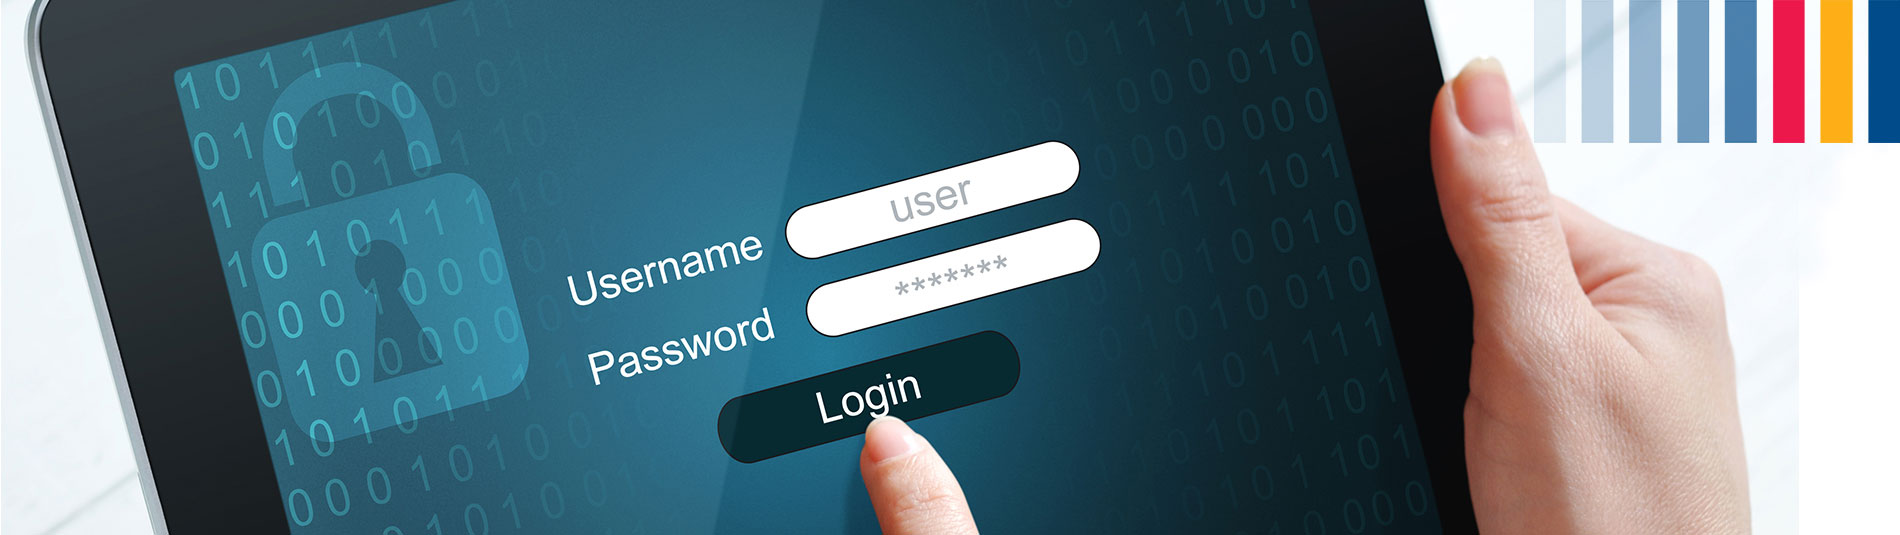 a username and password screen